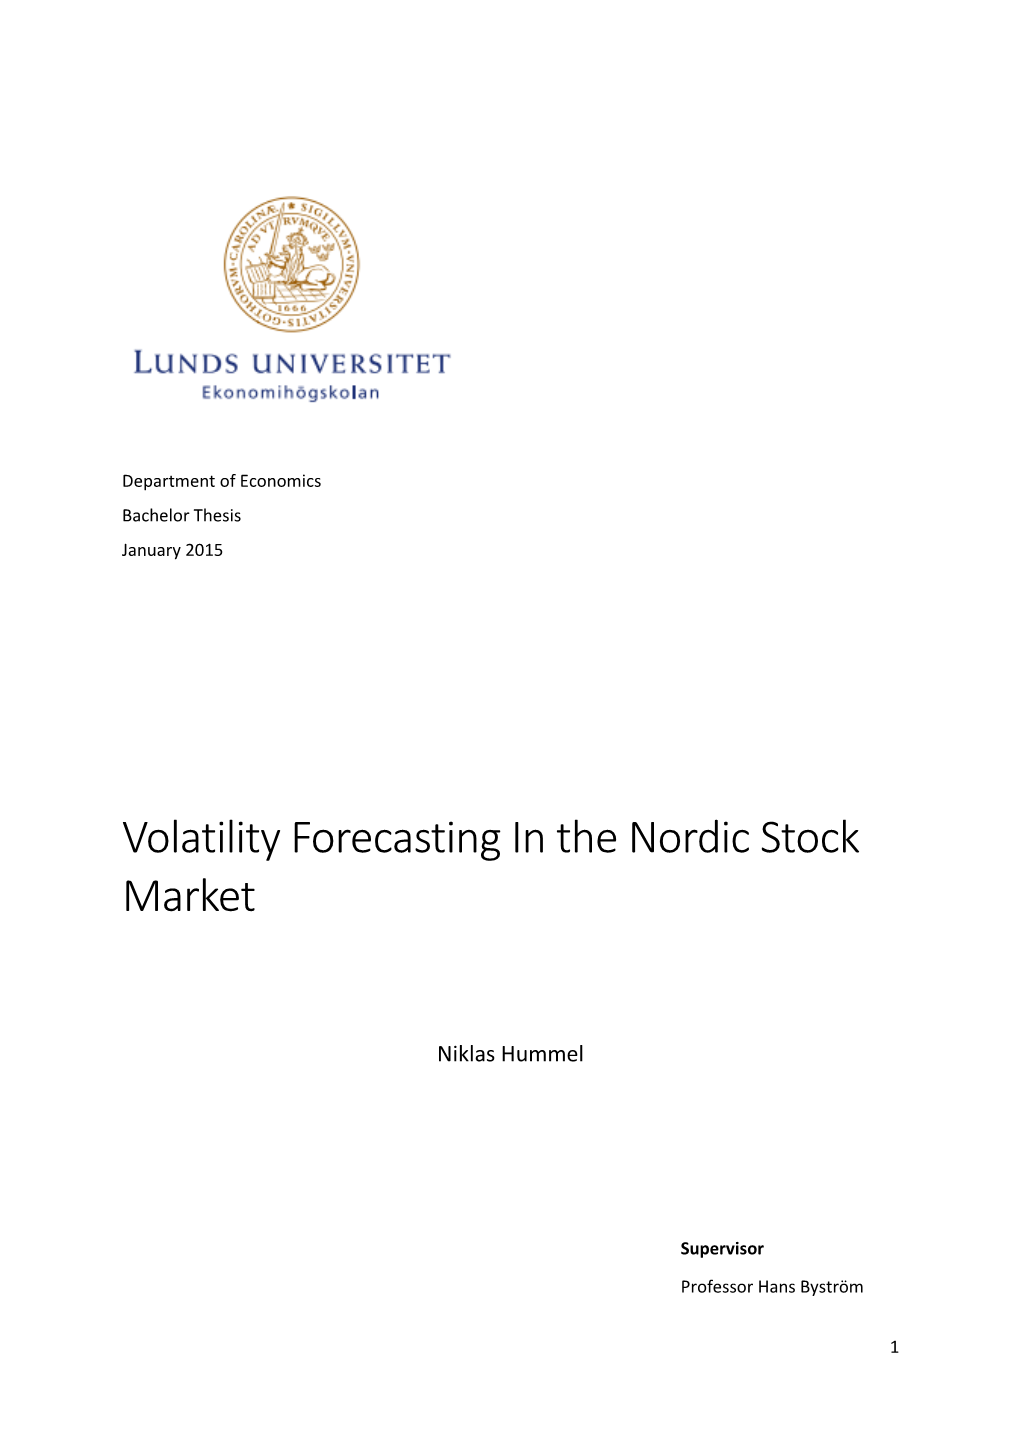 Volatility Forecasting in the Nordic Stock Market